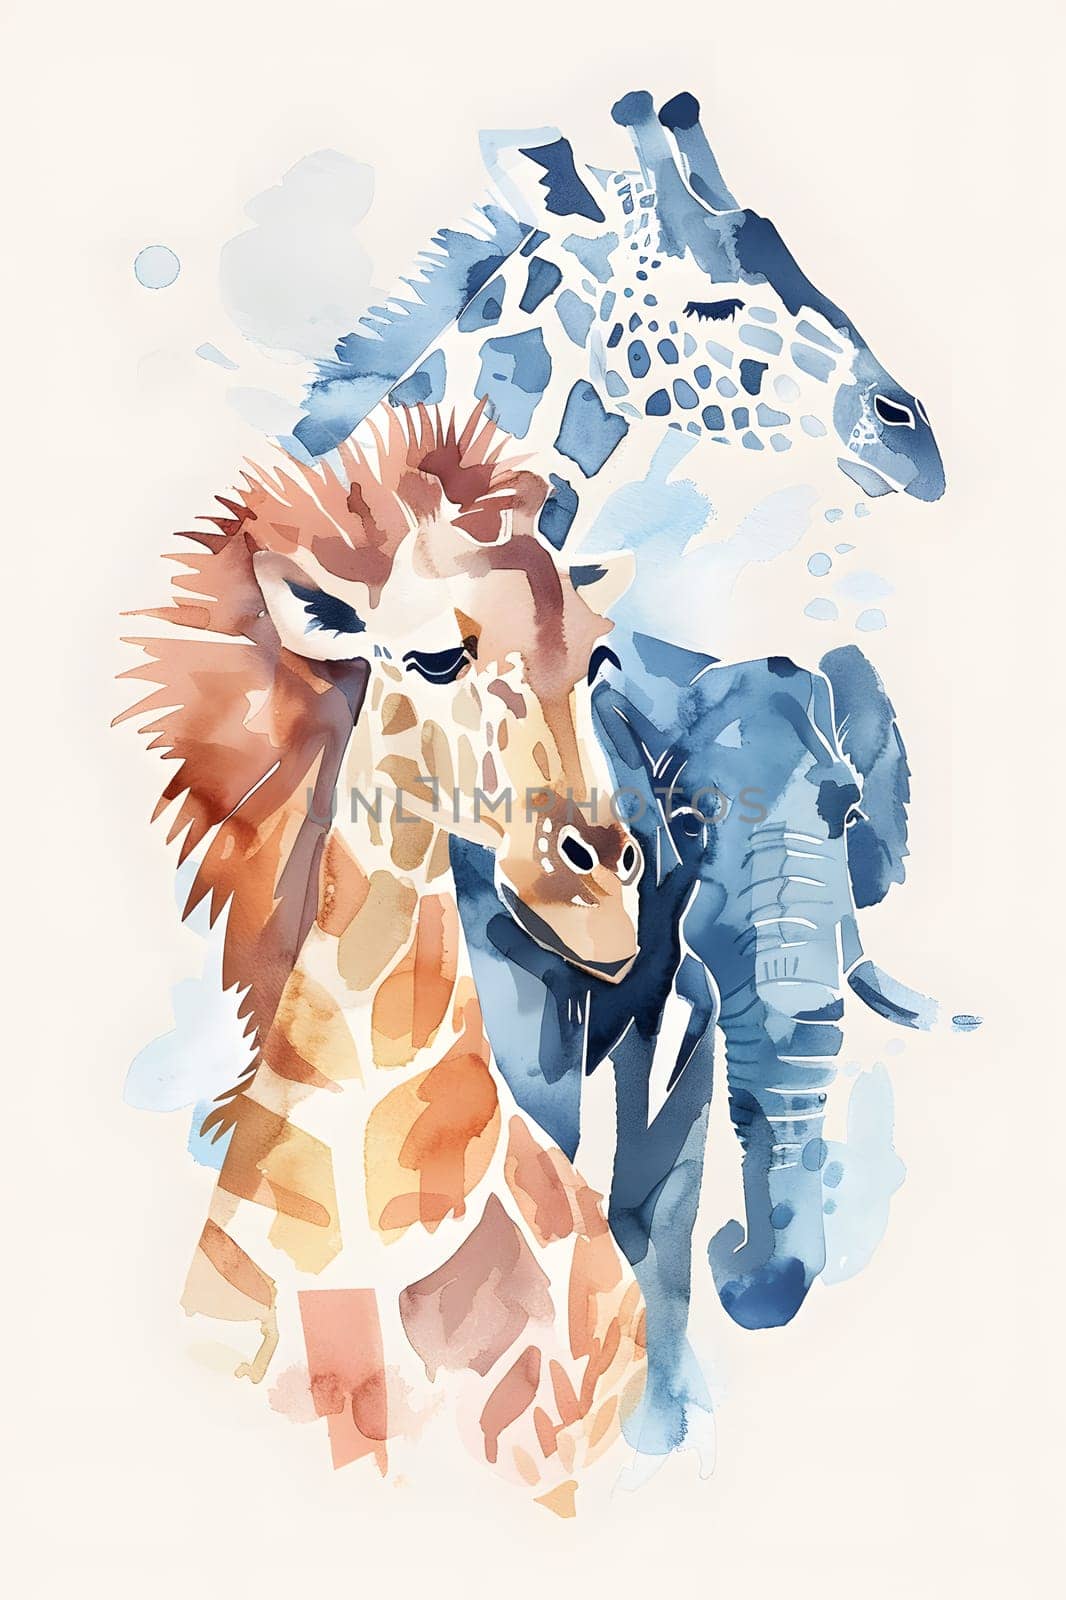 A watercolor painting featuring a giraffe, elephant, and lion in an electric blue sleeve, showcasing the artists intricate patterns and gestures in depicting these terrestrial working animals